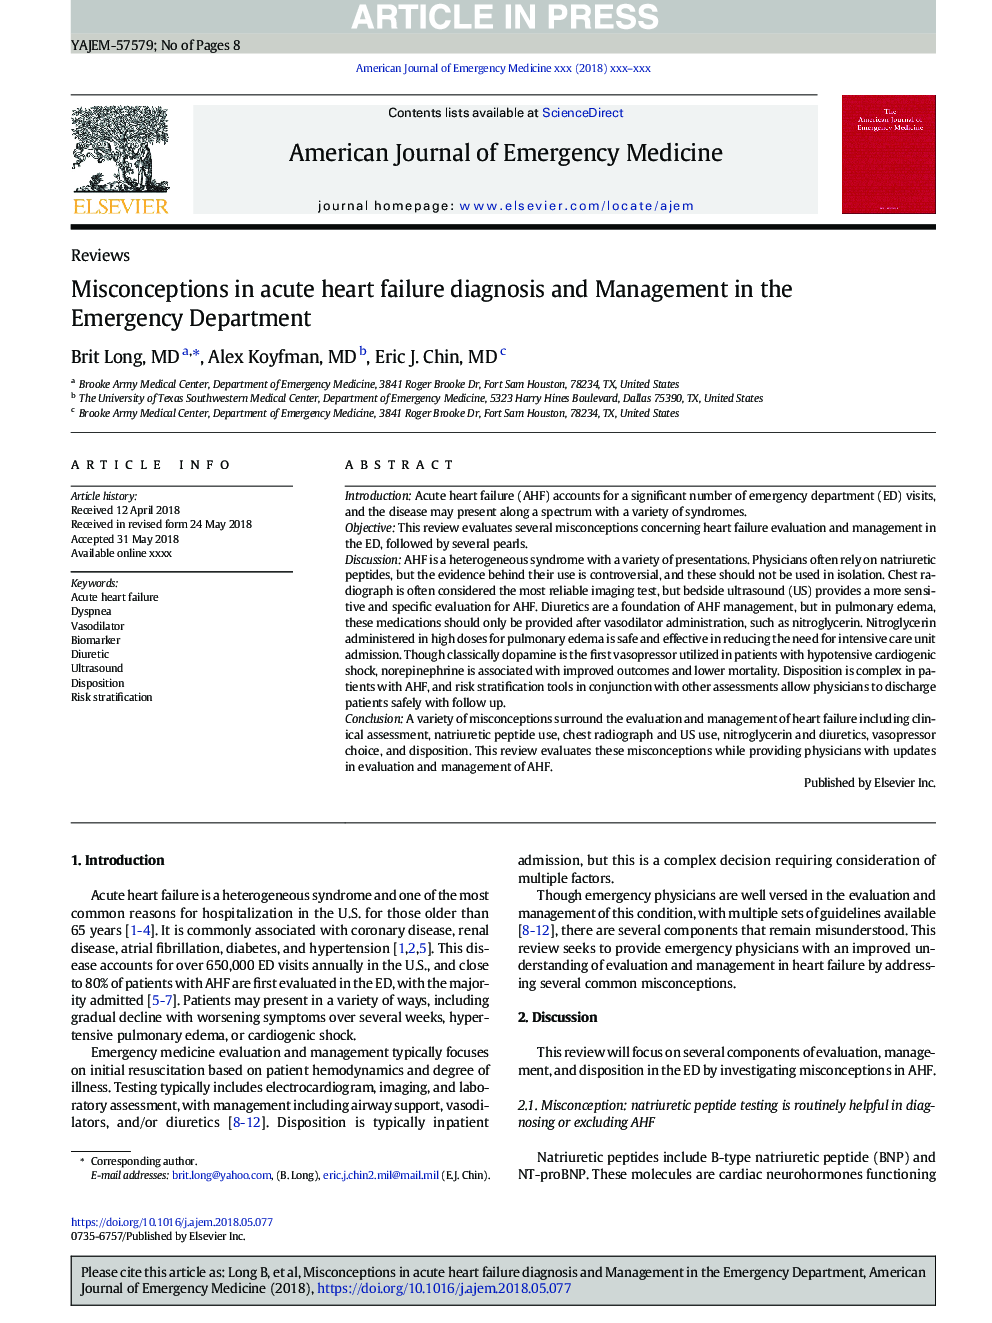 Misconceptions in acute heart failure diagnosis and Management in the Emergency Department